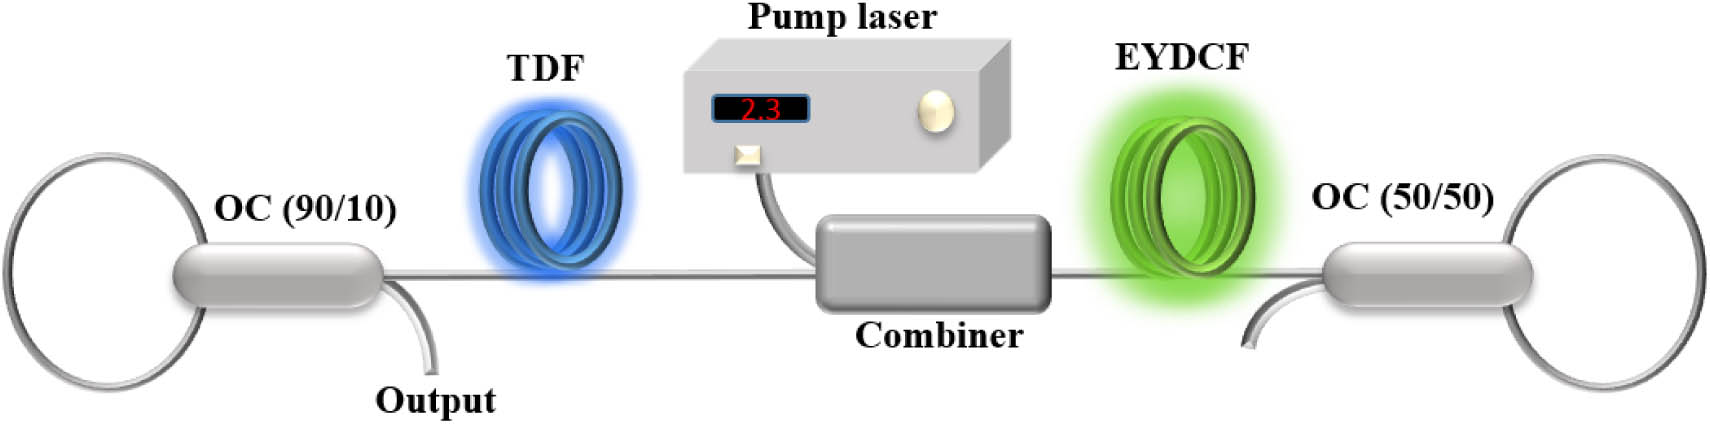 Schematic of the proposed passively Q-switched and gain-switched fiber laser.